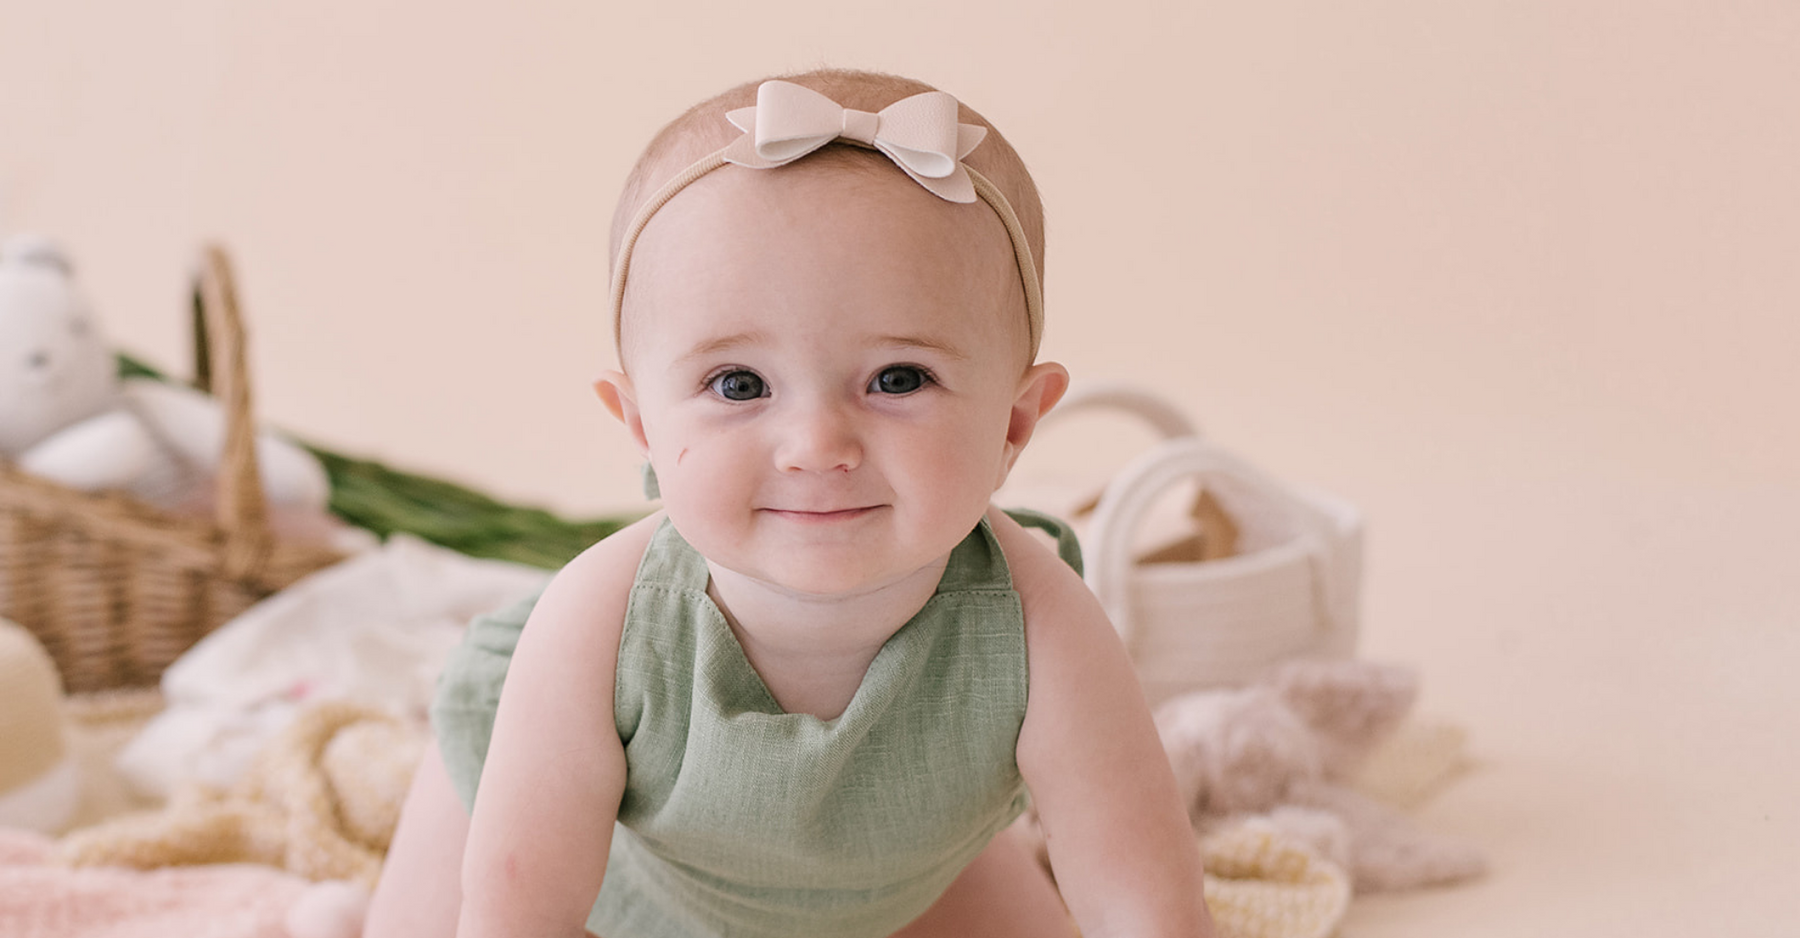 Are Baby Bows Safe?